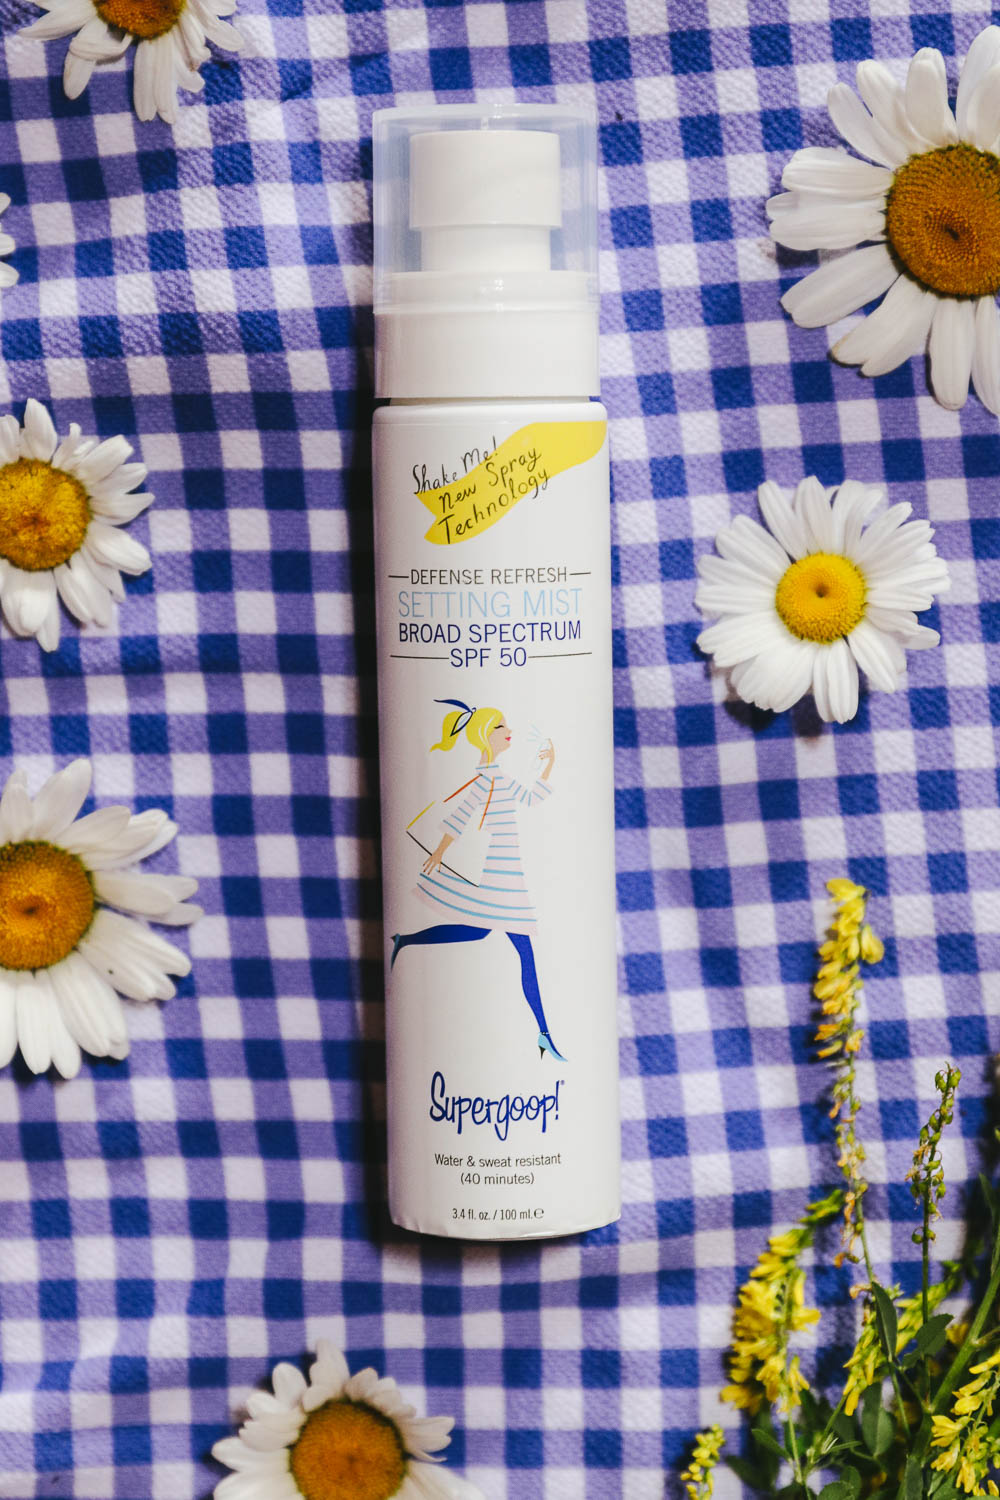 Supergoop anti-aging sunscreen, staying sun safe at elevation with supergoop refresh mist